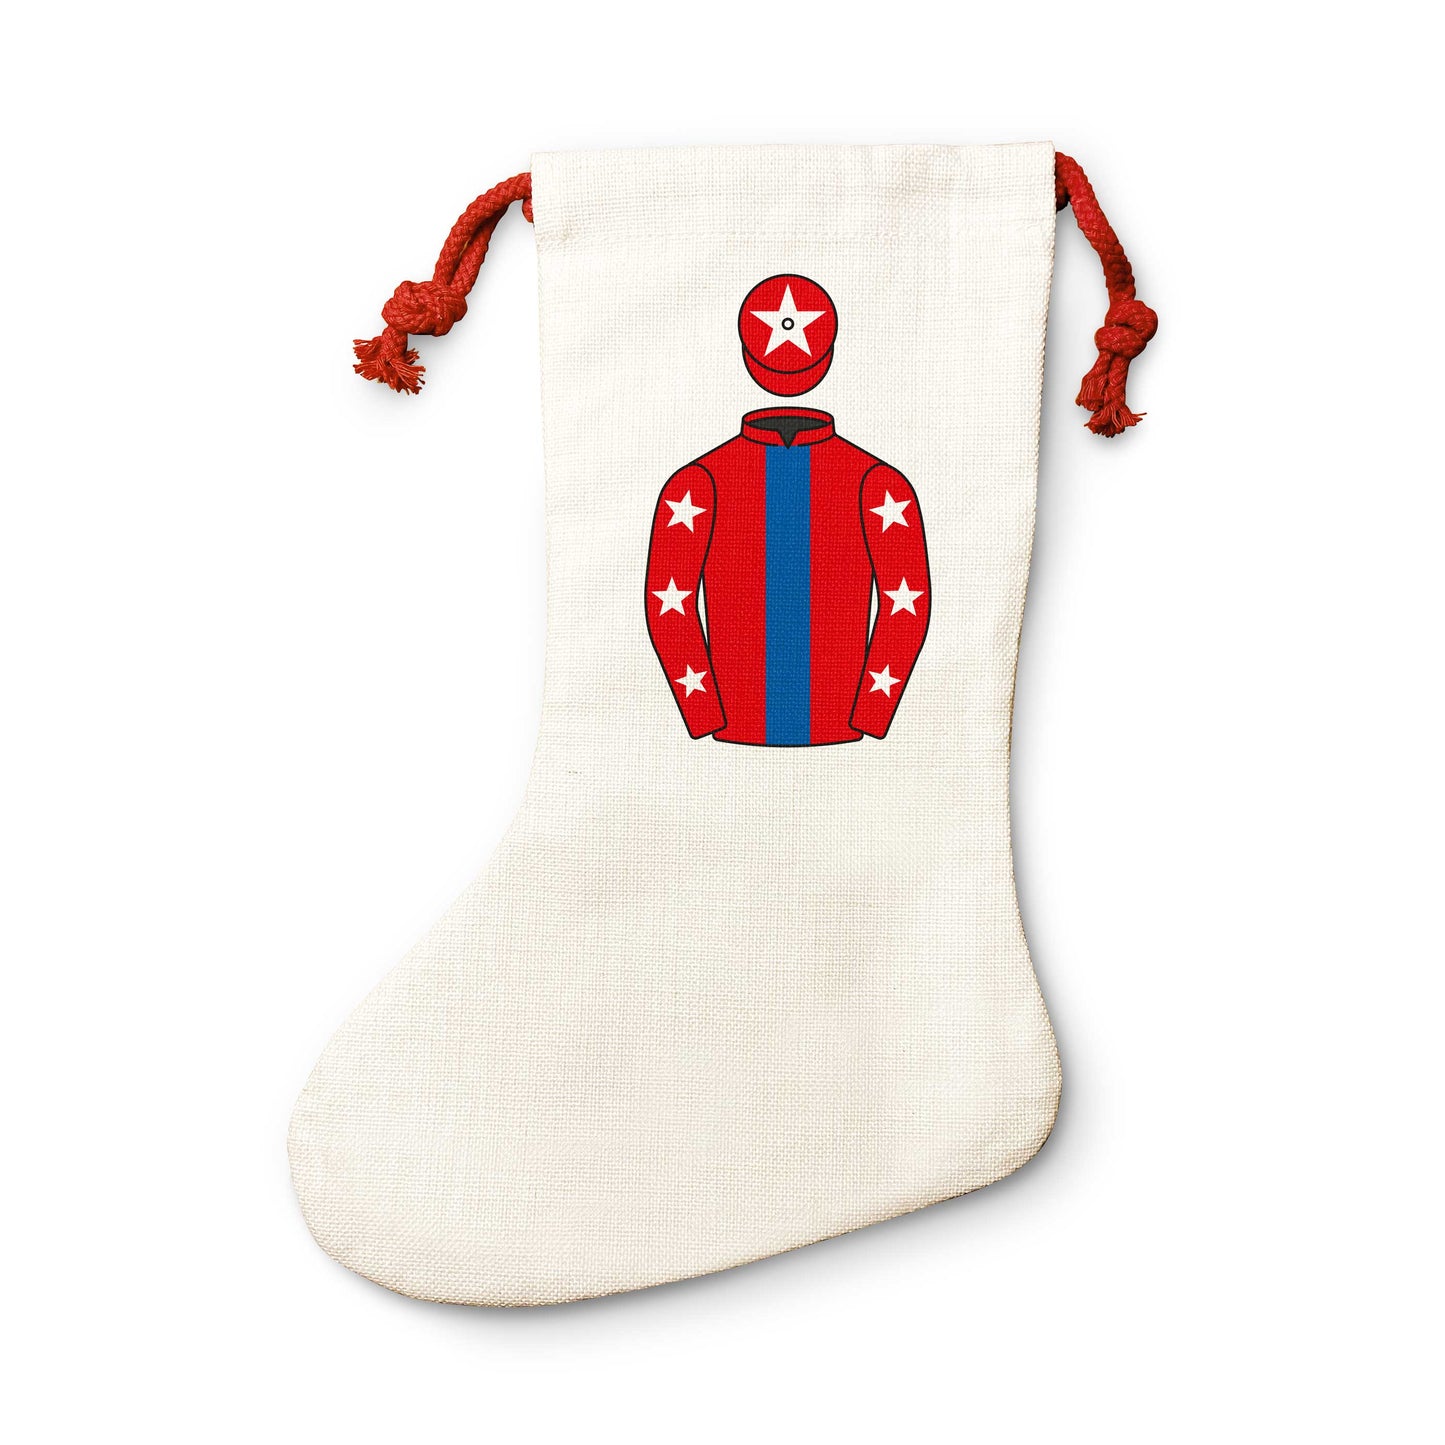 The Preston Family and Friends Ltd Christmas Stocking - Christmas Stocking - Hacked Up